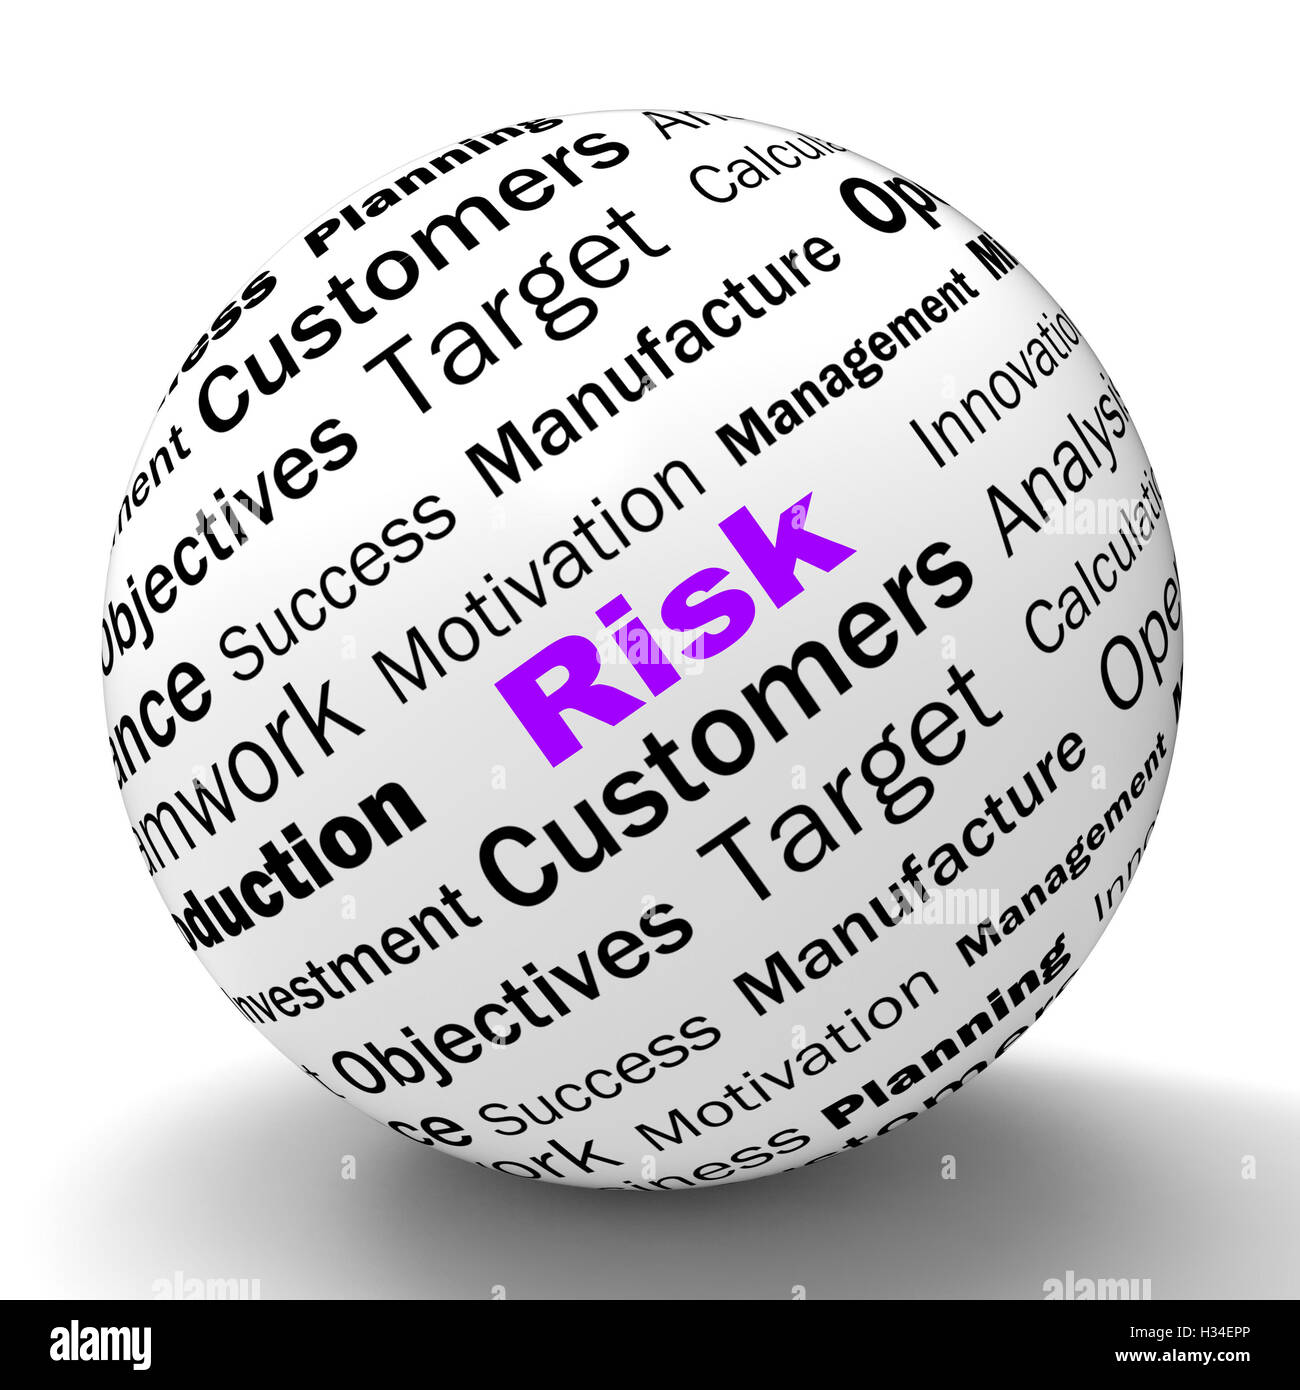 Risk Sphere Definition Means Dangerous And Unstable Stock Photo